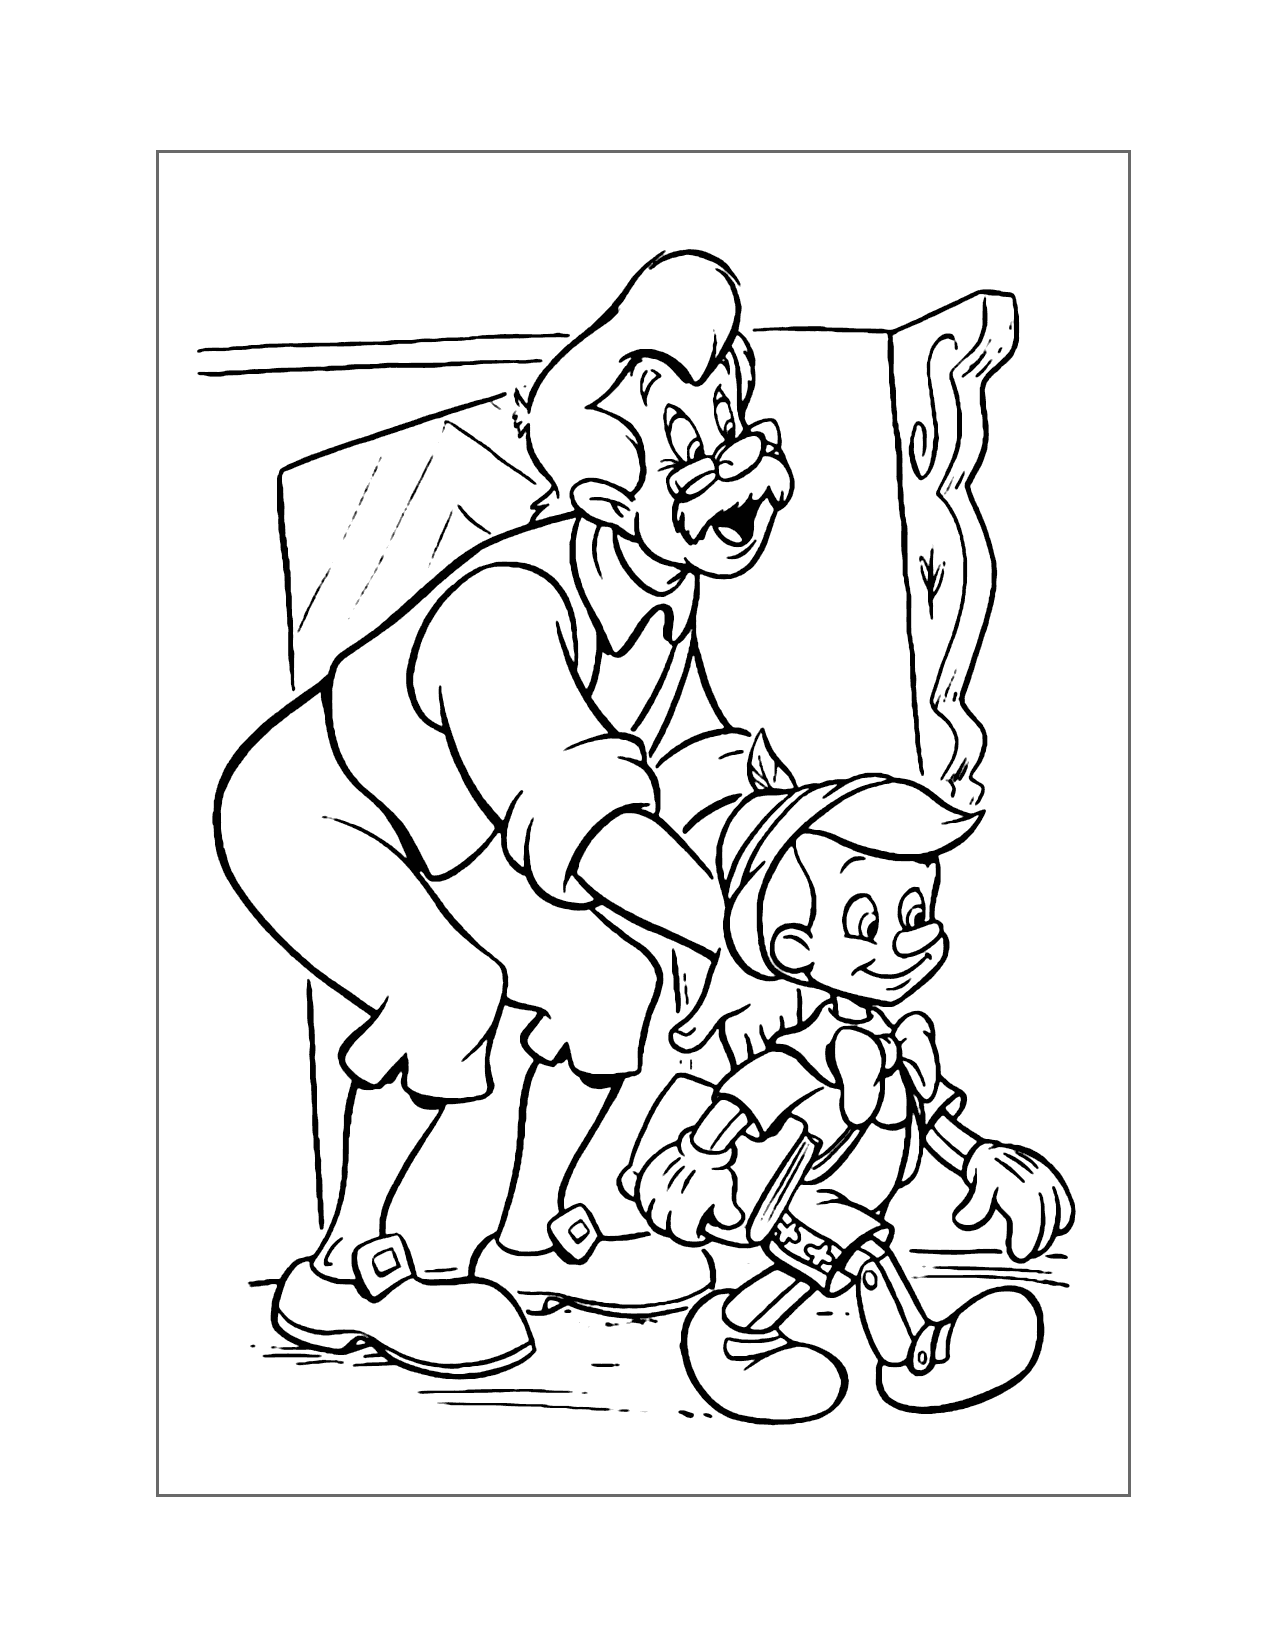 Geppetto Sends Pinocchio To School Coloring Page